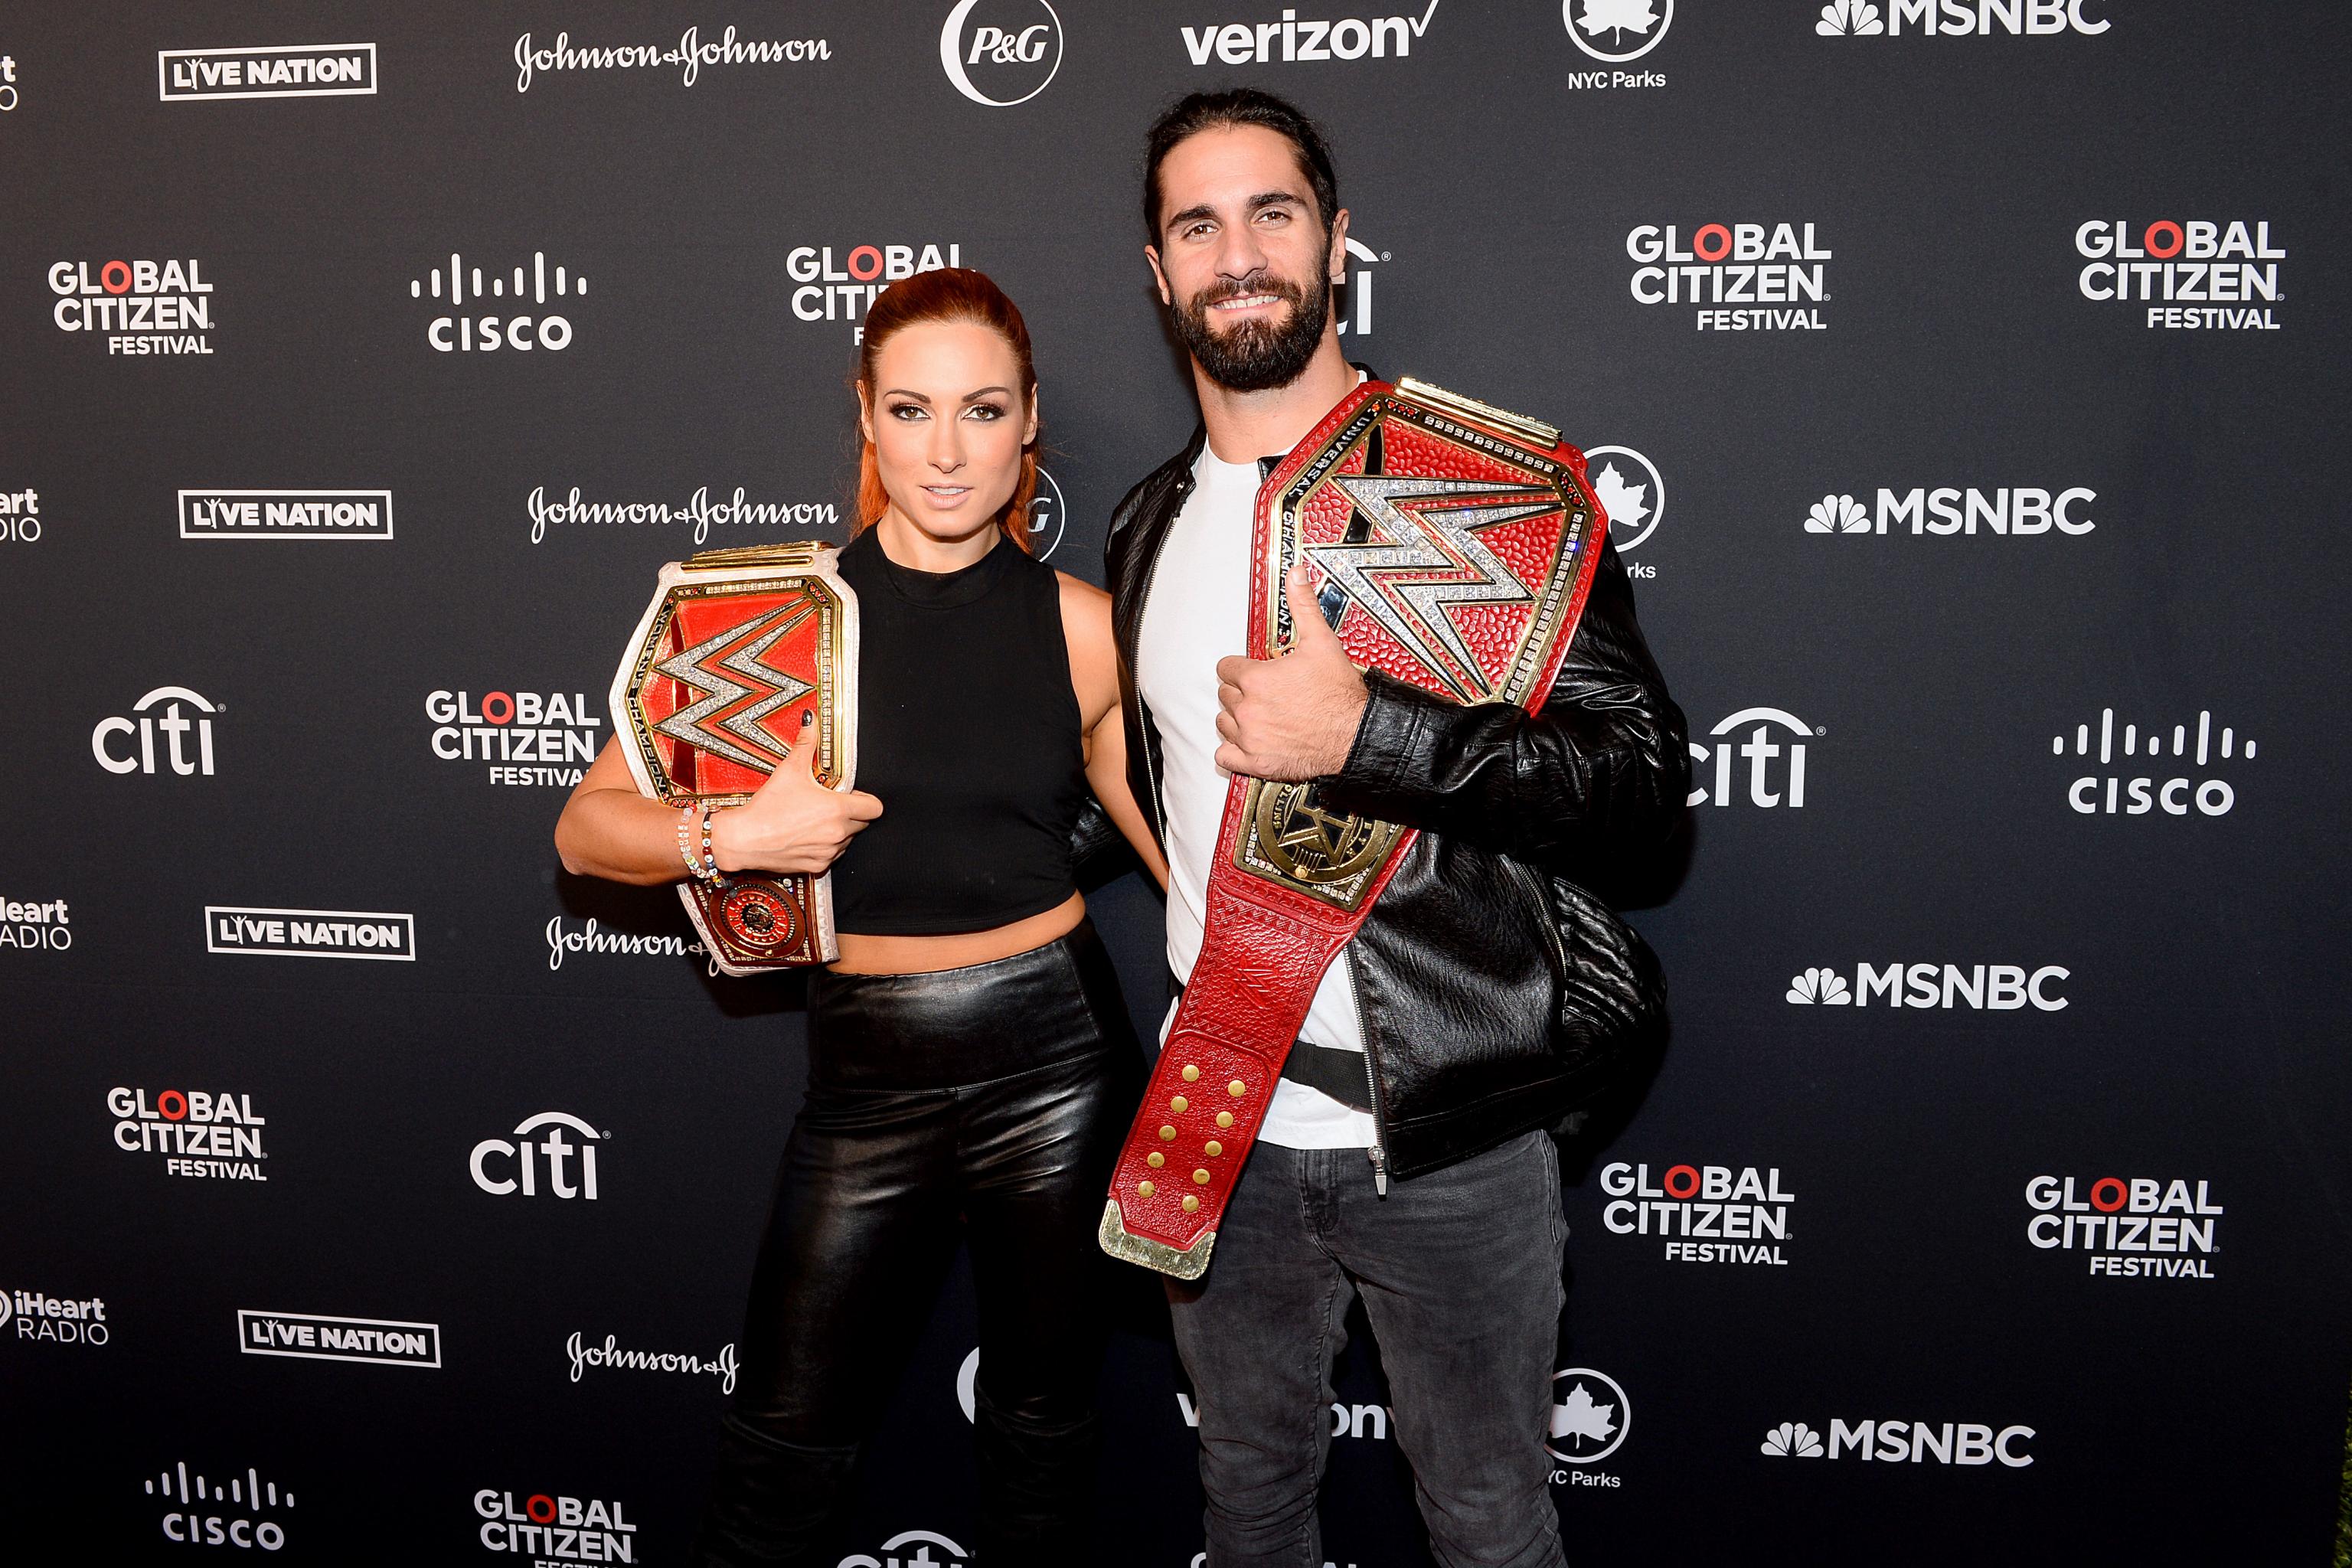 WWE News Updates on X: Seth Rollins and Becky Lynch chilling with